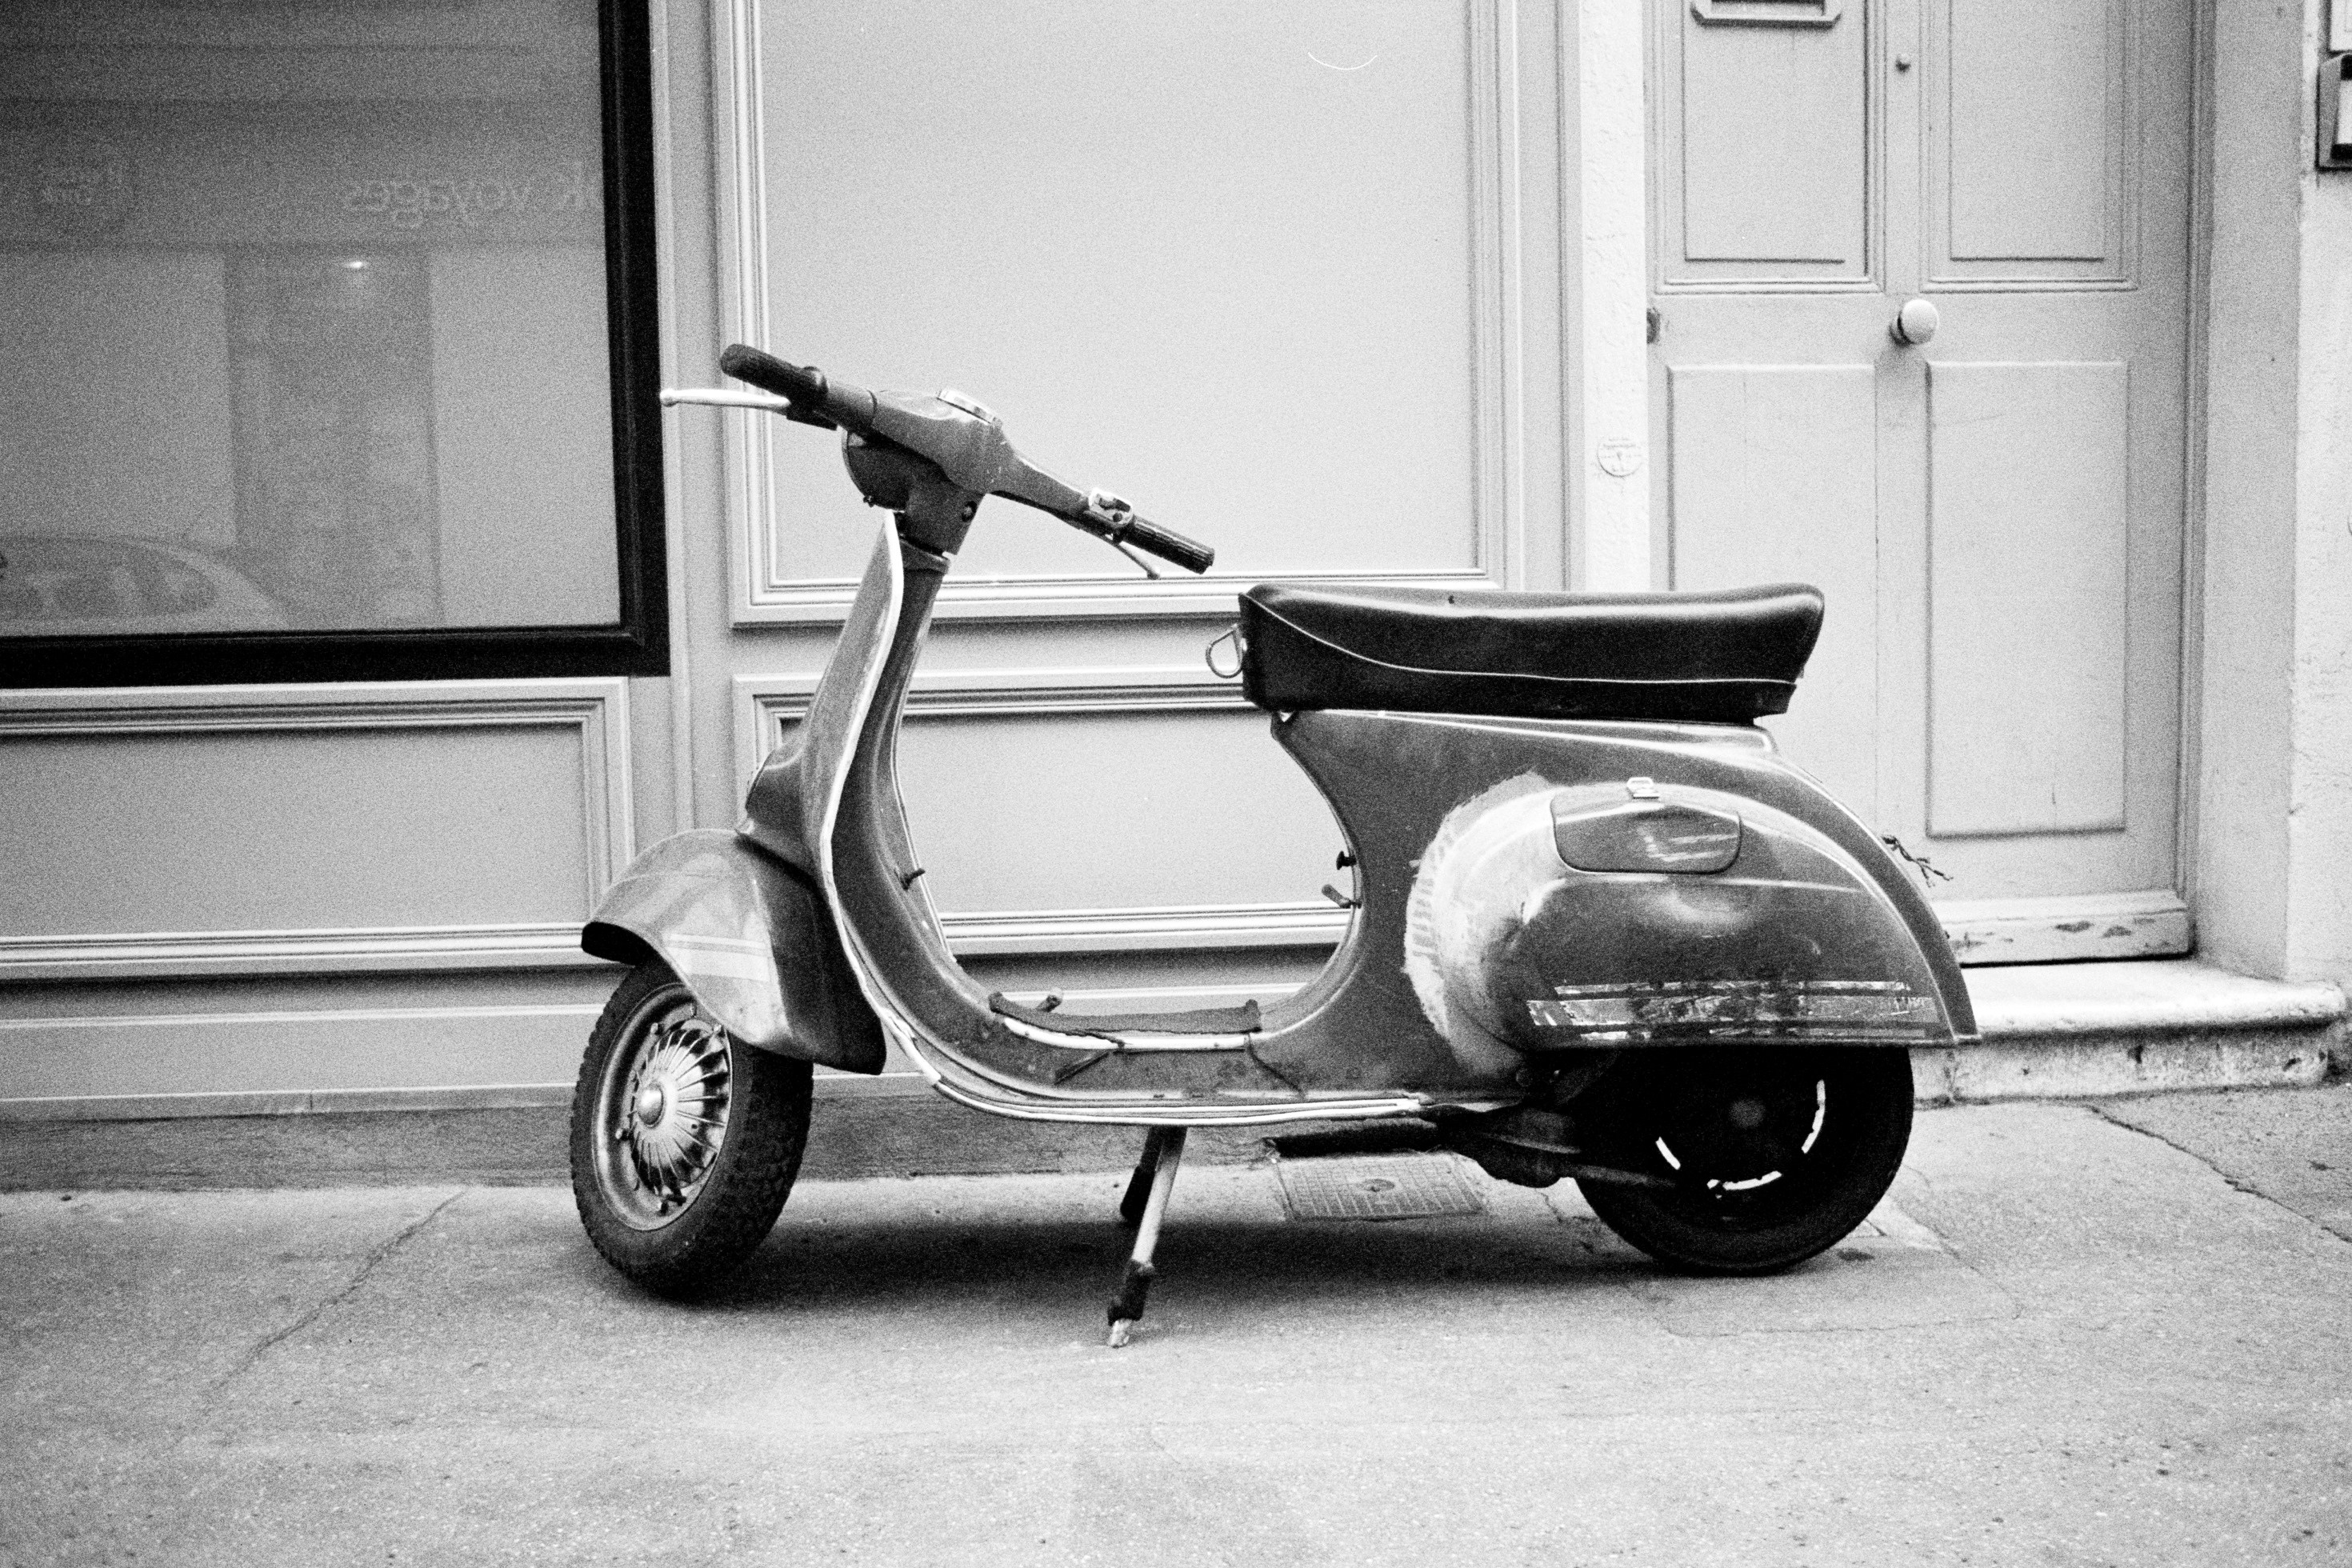 What makes this Vespa even more cool, is that it belongs to someone who lives in Monte Carlo.